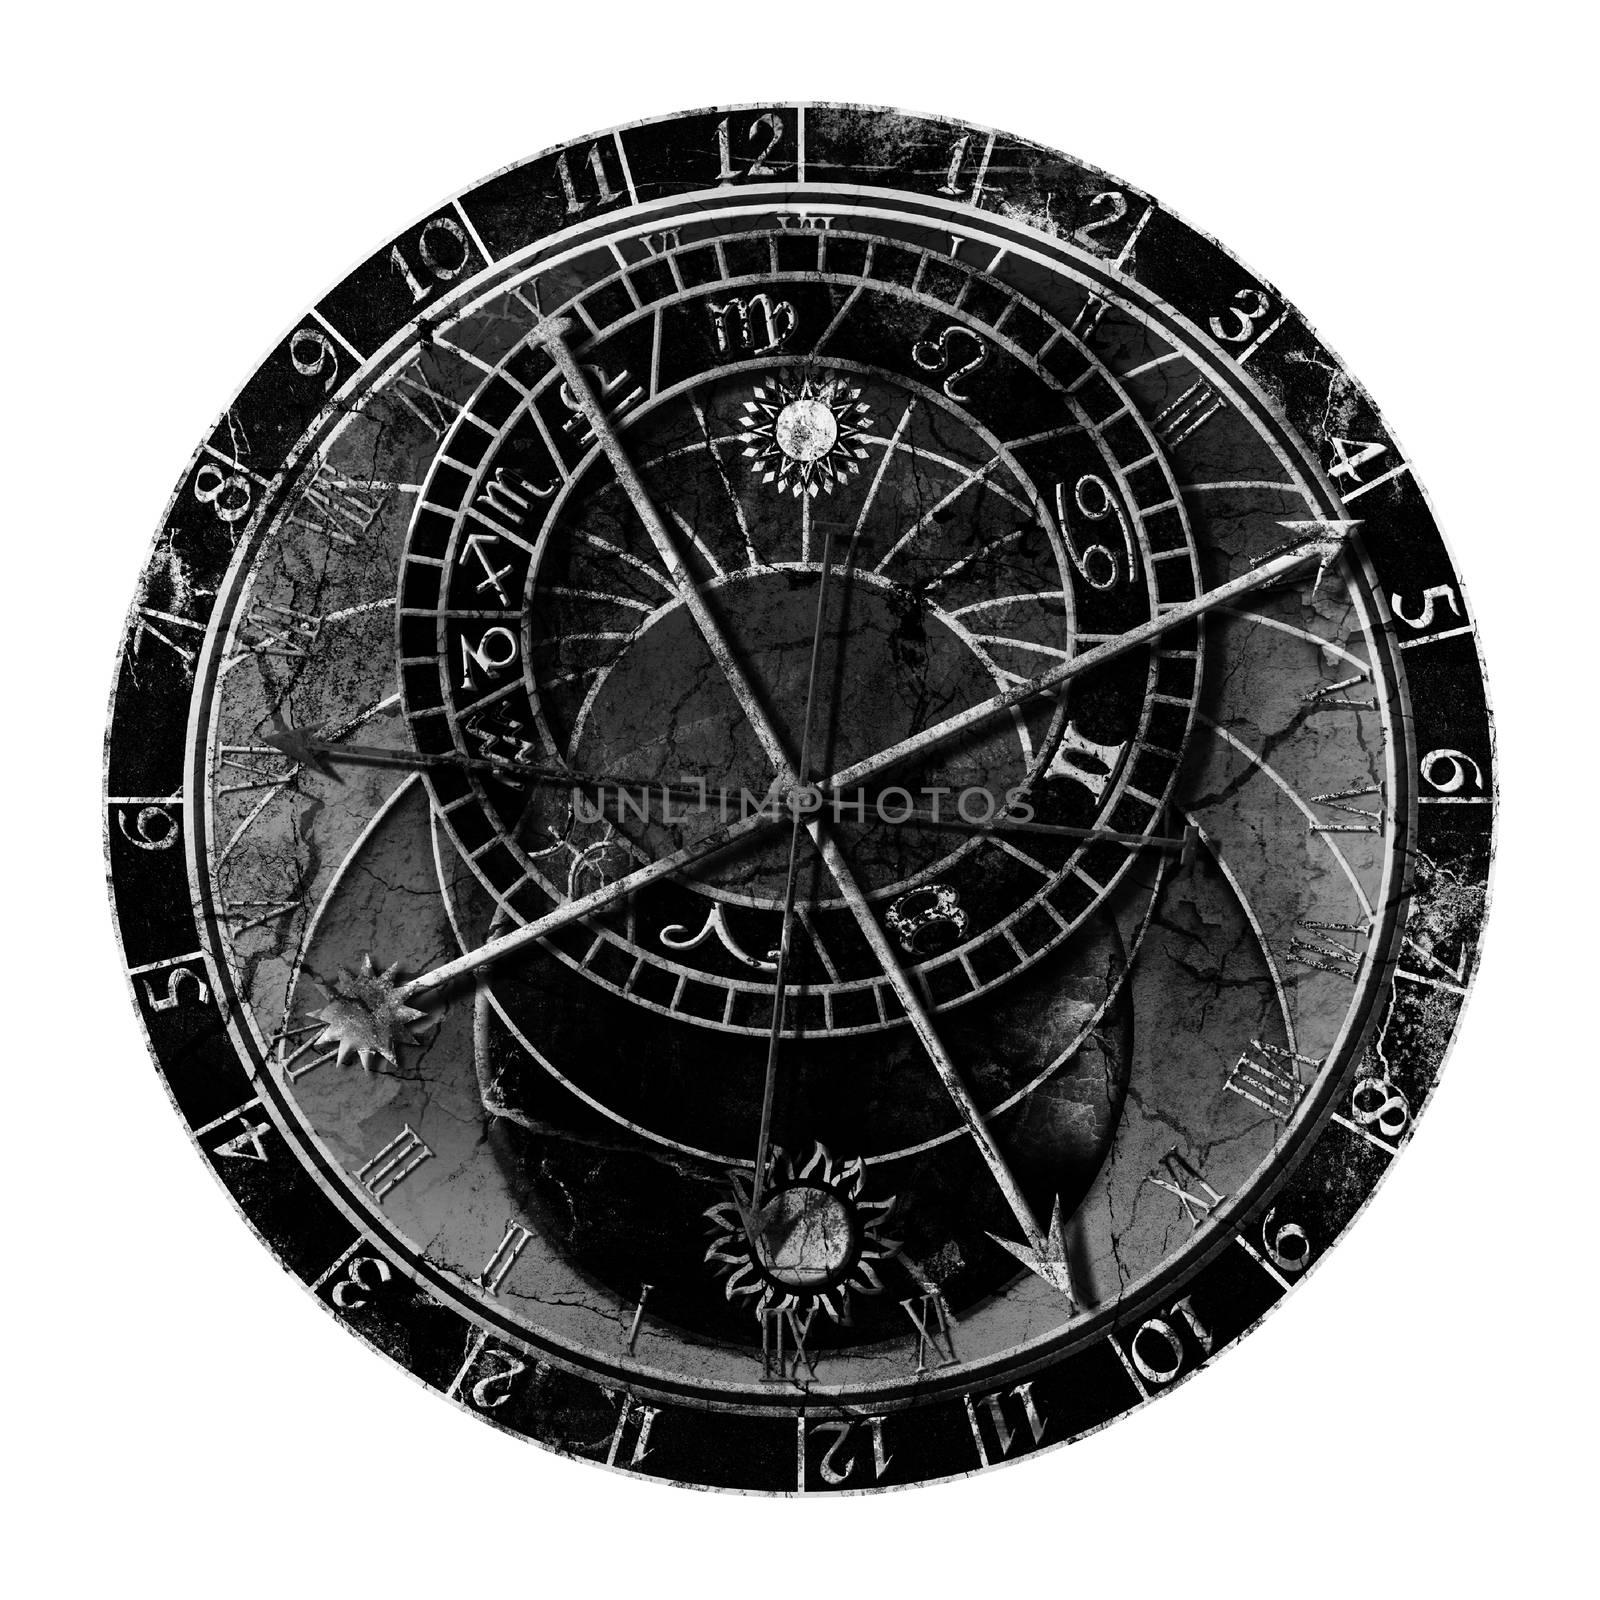 Image of the astronomical clock in grunge style